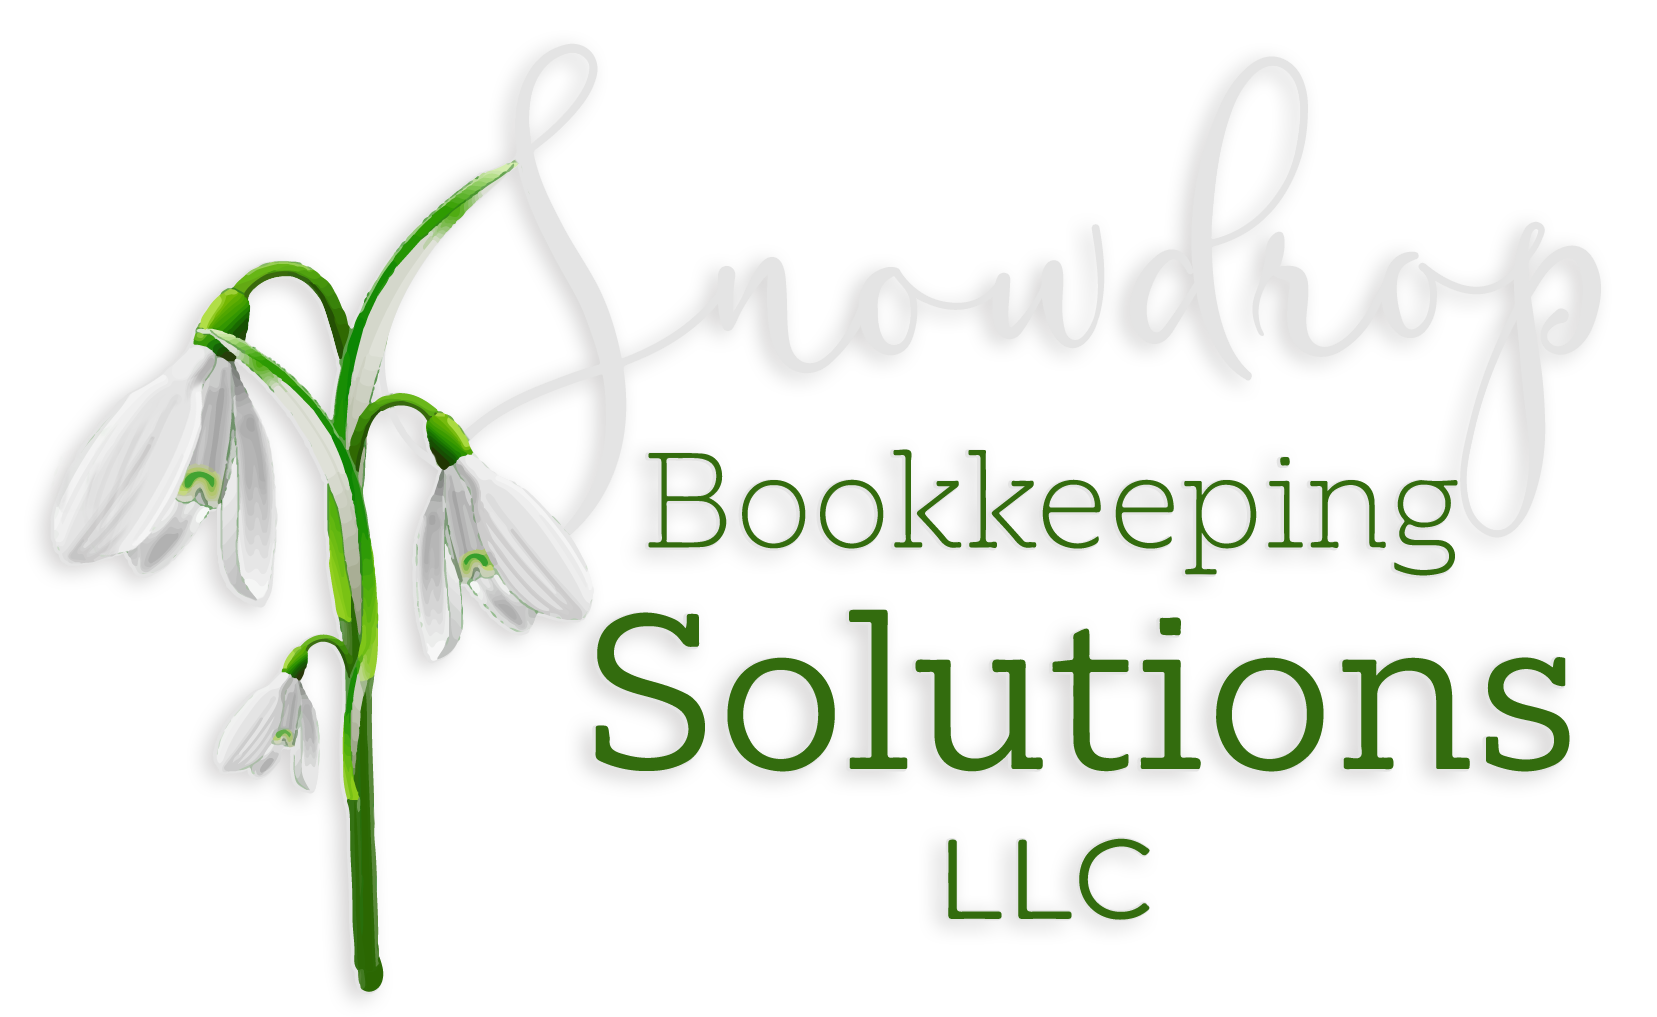 Snowdrop Bookkeeping Solutions LLC